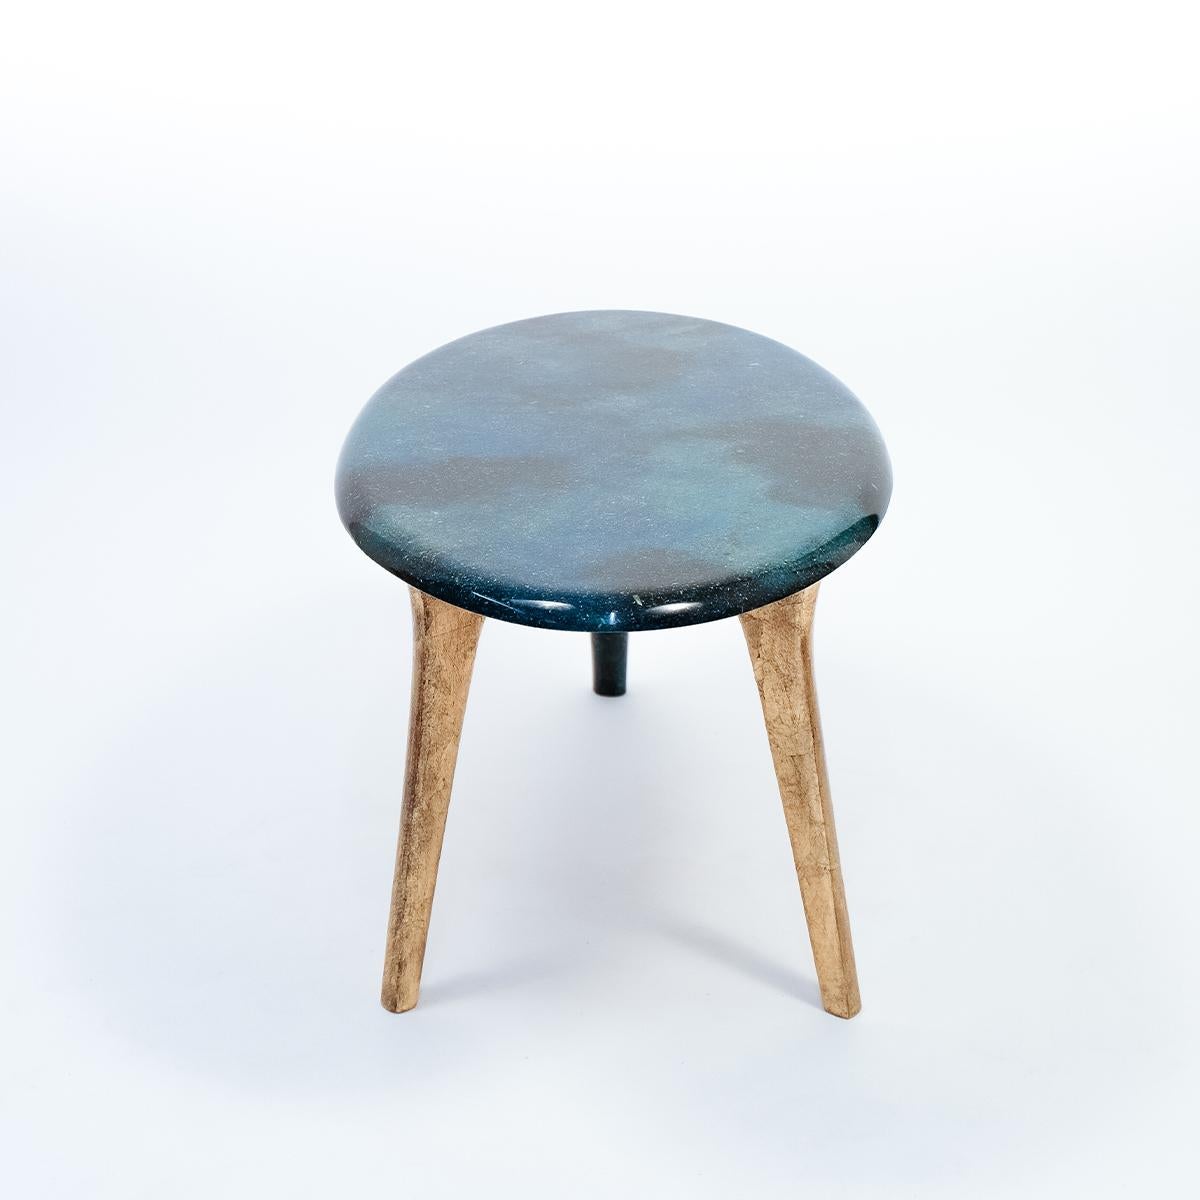 Modern Noste Bench Wood and Pigment Resin